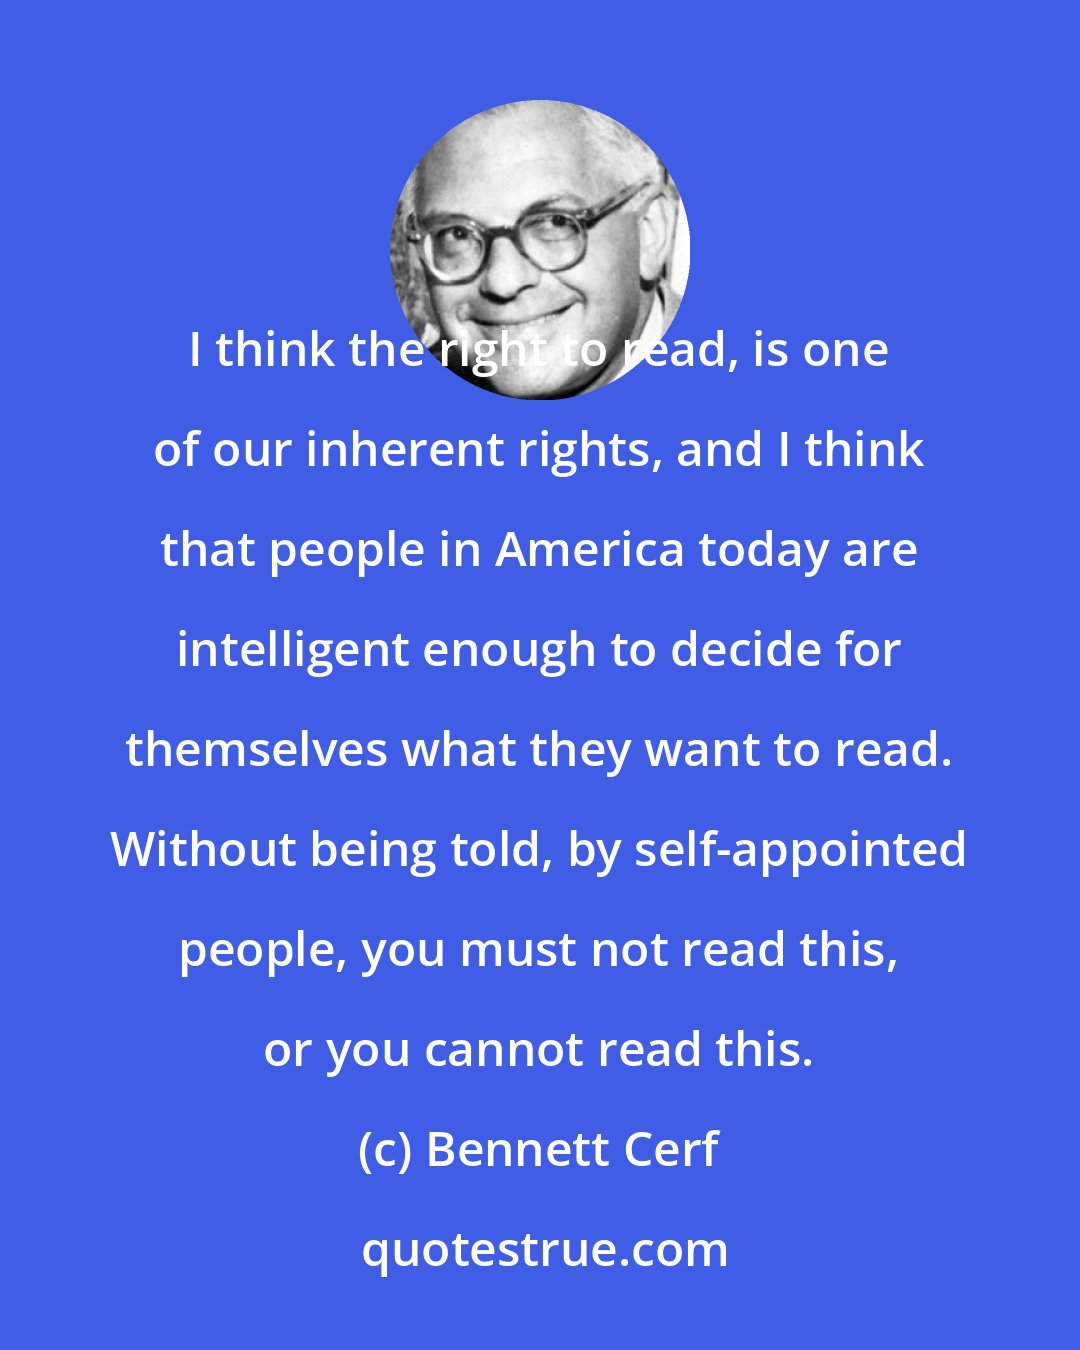 Bennett Cerf: I think the right to read, is one of our inherent rights, and I think that people in America today are intelligent enough to decide for themselves what they want to read. Without being told, by self-appointed people, you must not read this, or you cannot read this.